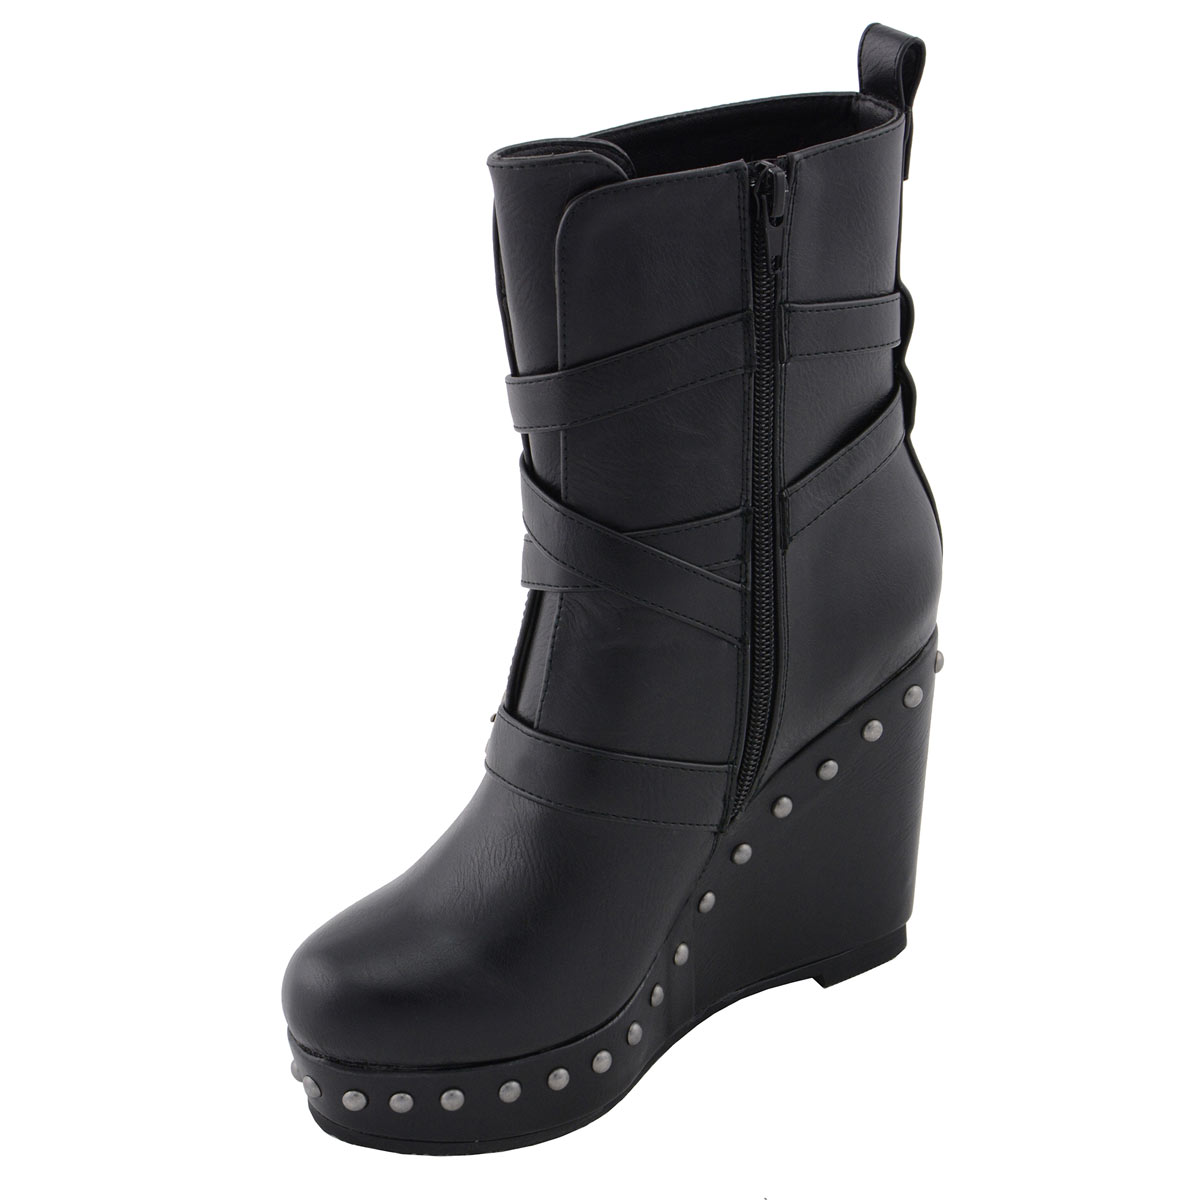 Milwaukee Leather MBL9437 Women's Black Triple Strap Fashion Boots with Platform Wedge